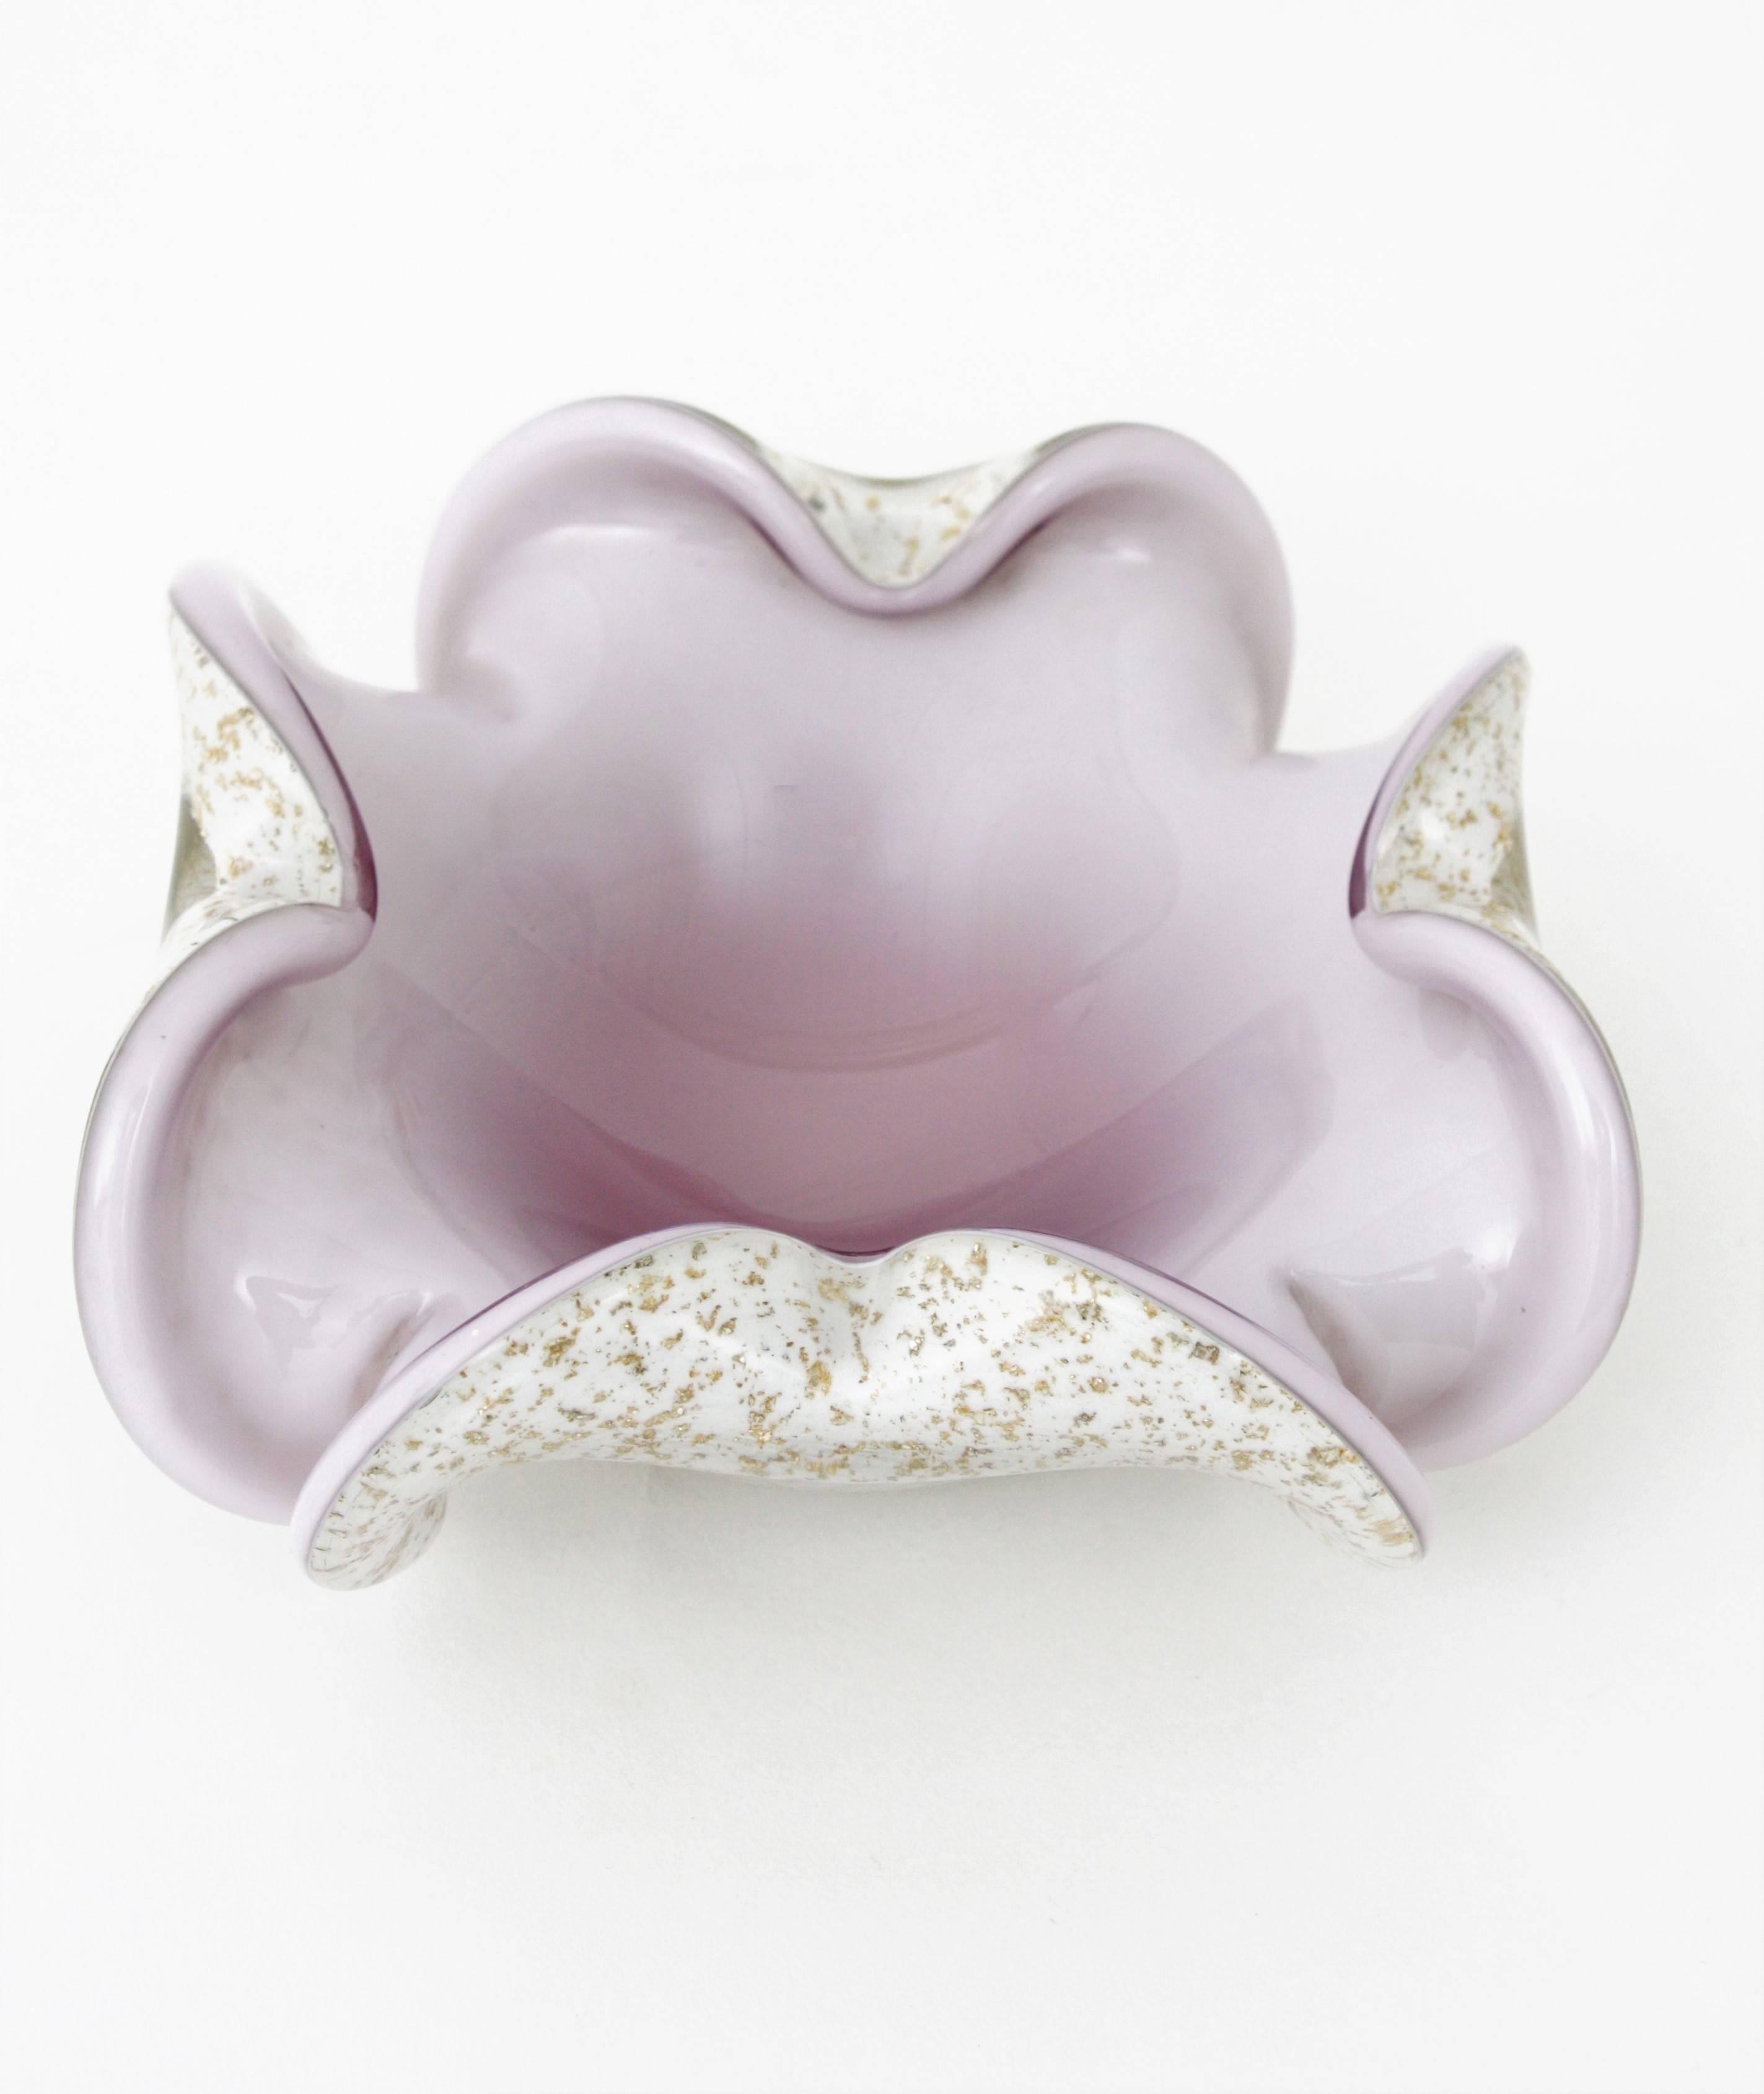 Hand-Crafted Murano Pale Purple White, Silver & Gold Flecks Flower Art Glass Bowl or Ashtray